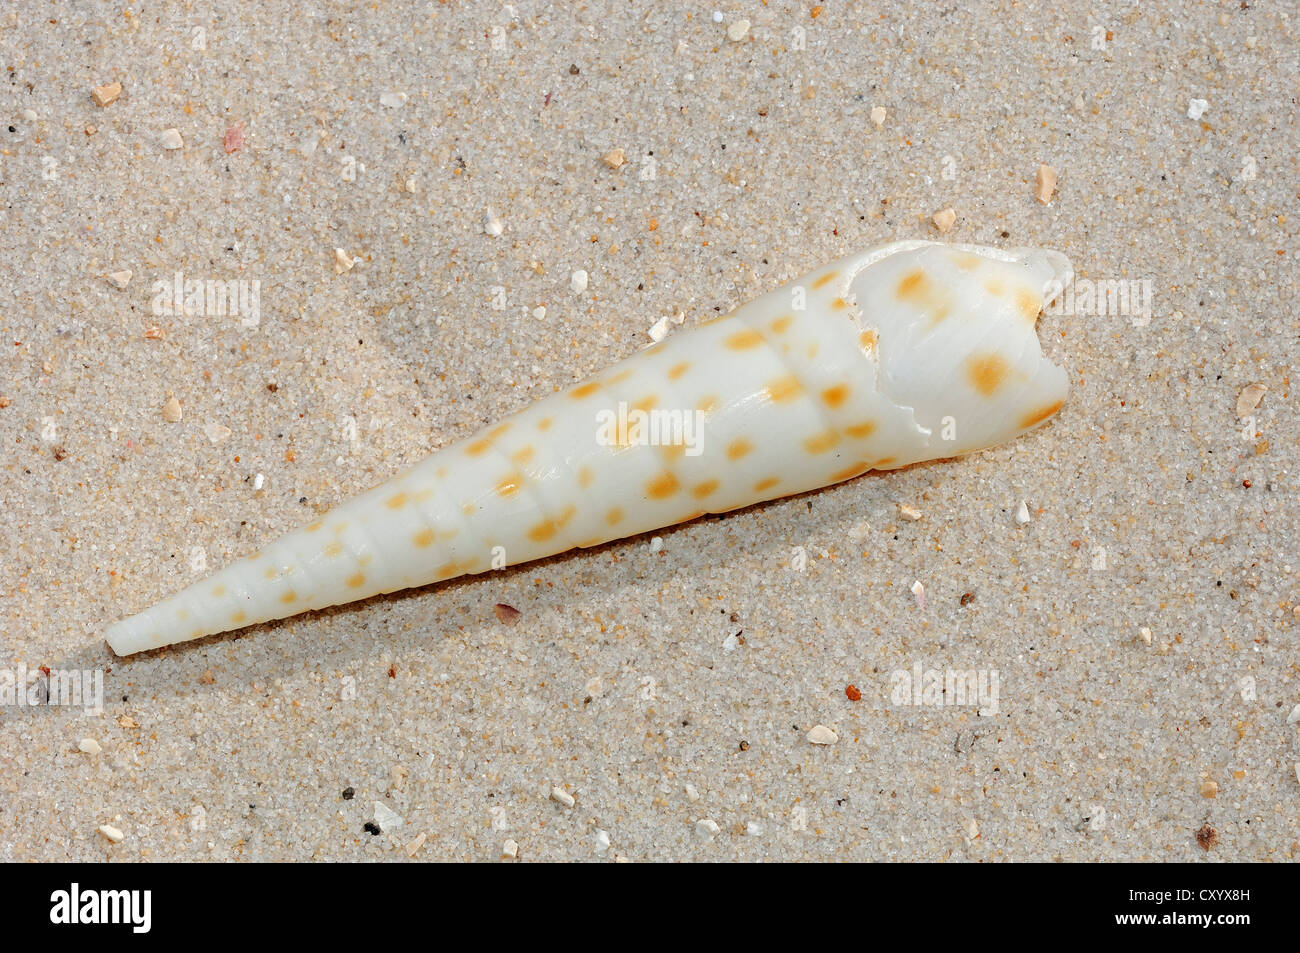 Auger shell (Terebra sp.), found in the Indo-Pacific Ocean Stock Photo